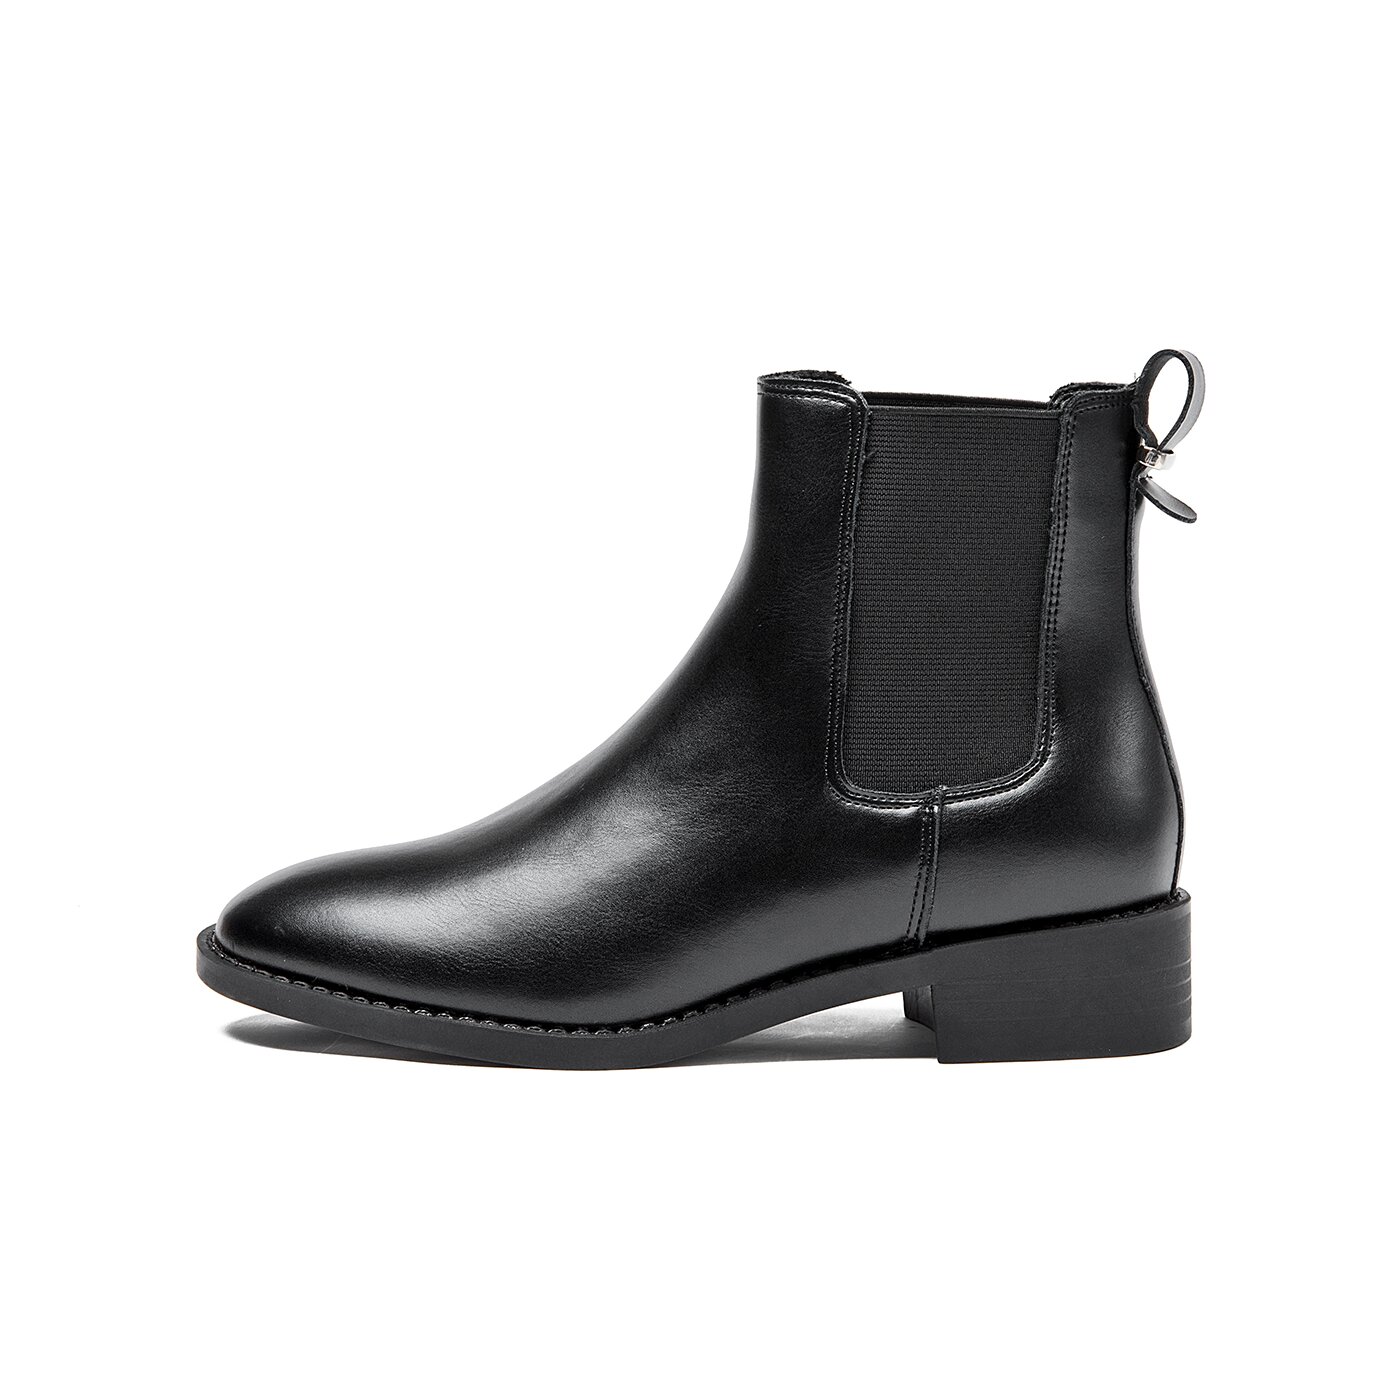 Solessy - Chelsea Boots - Black